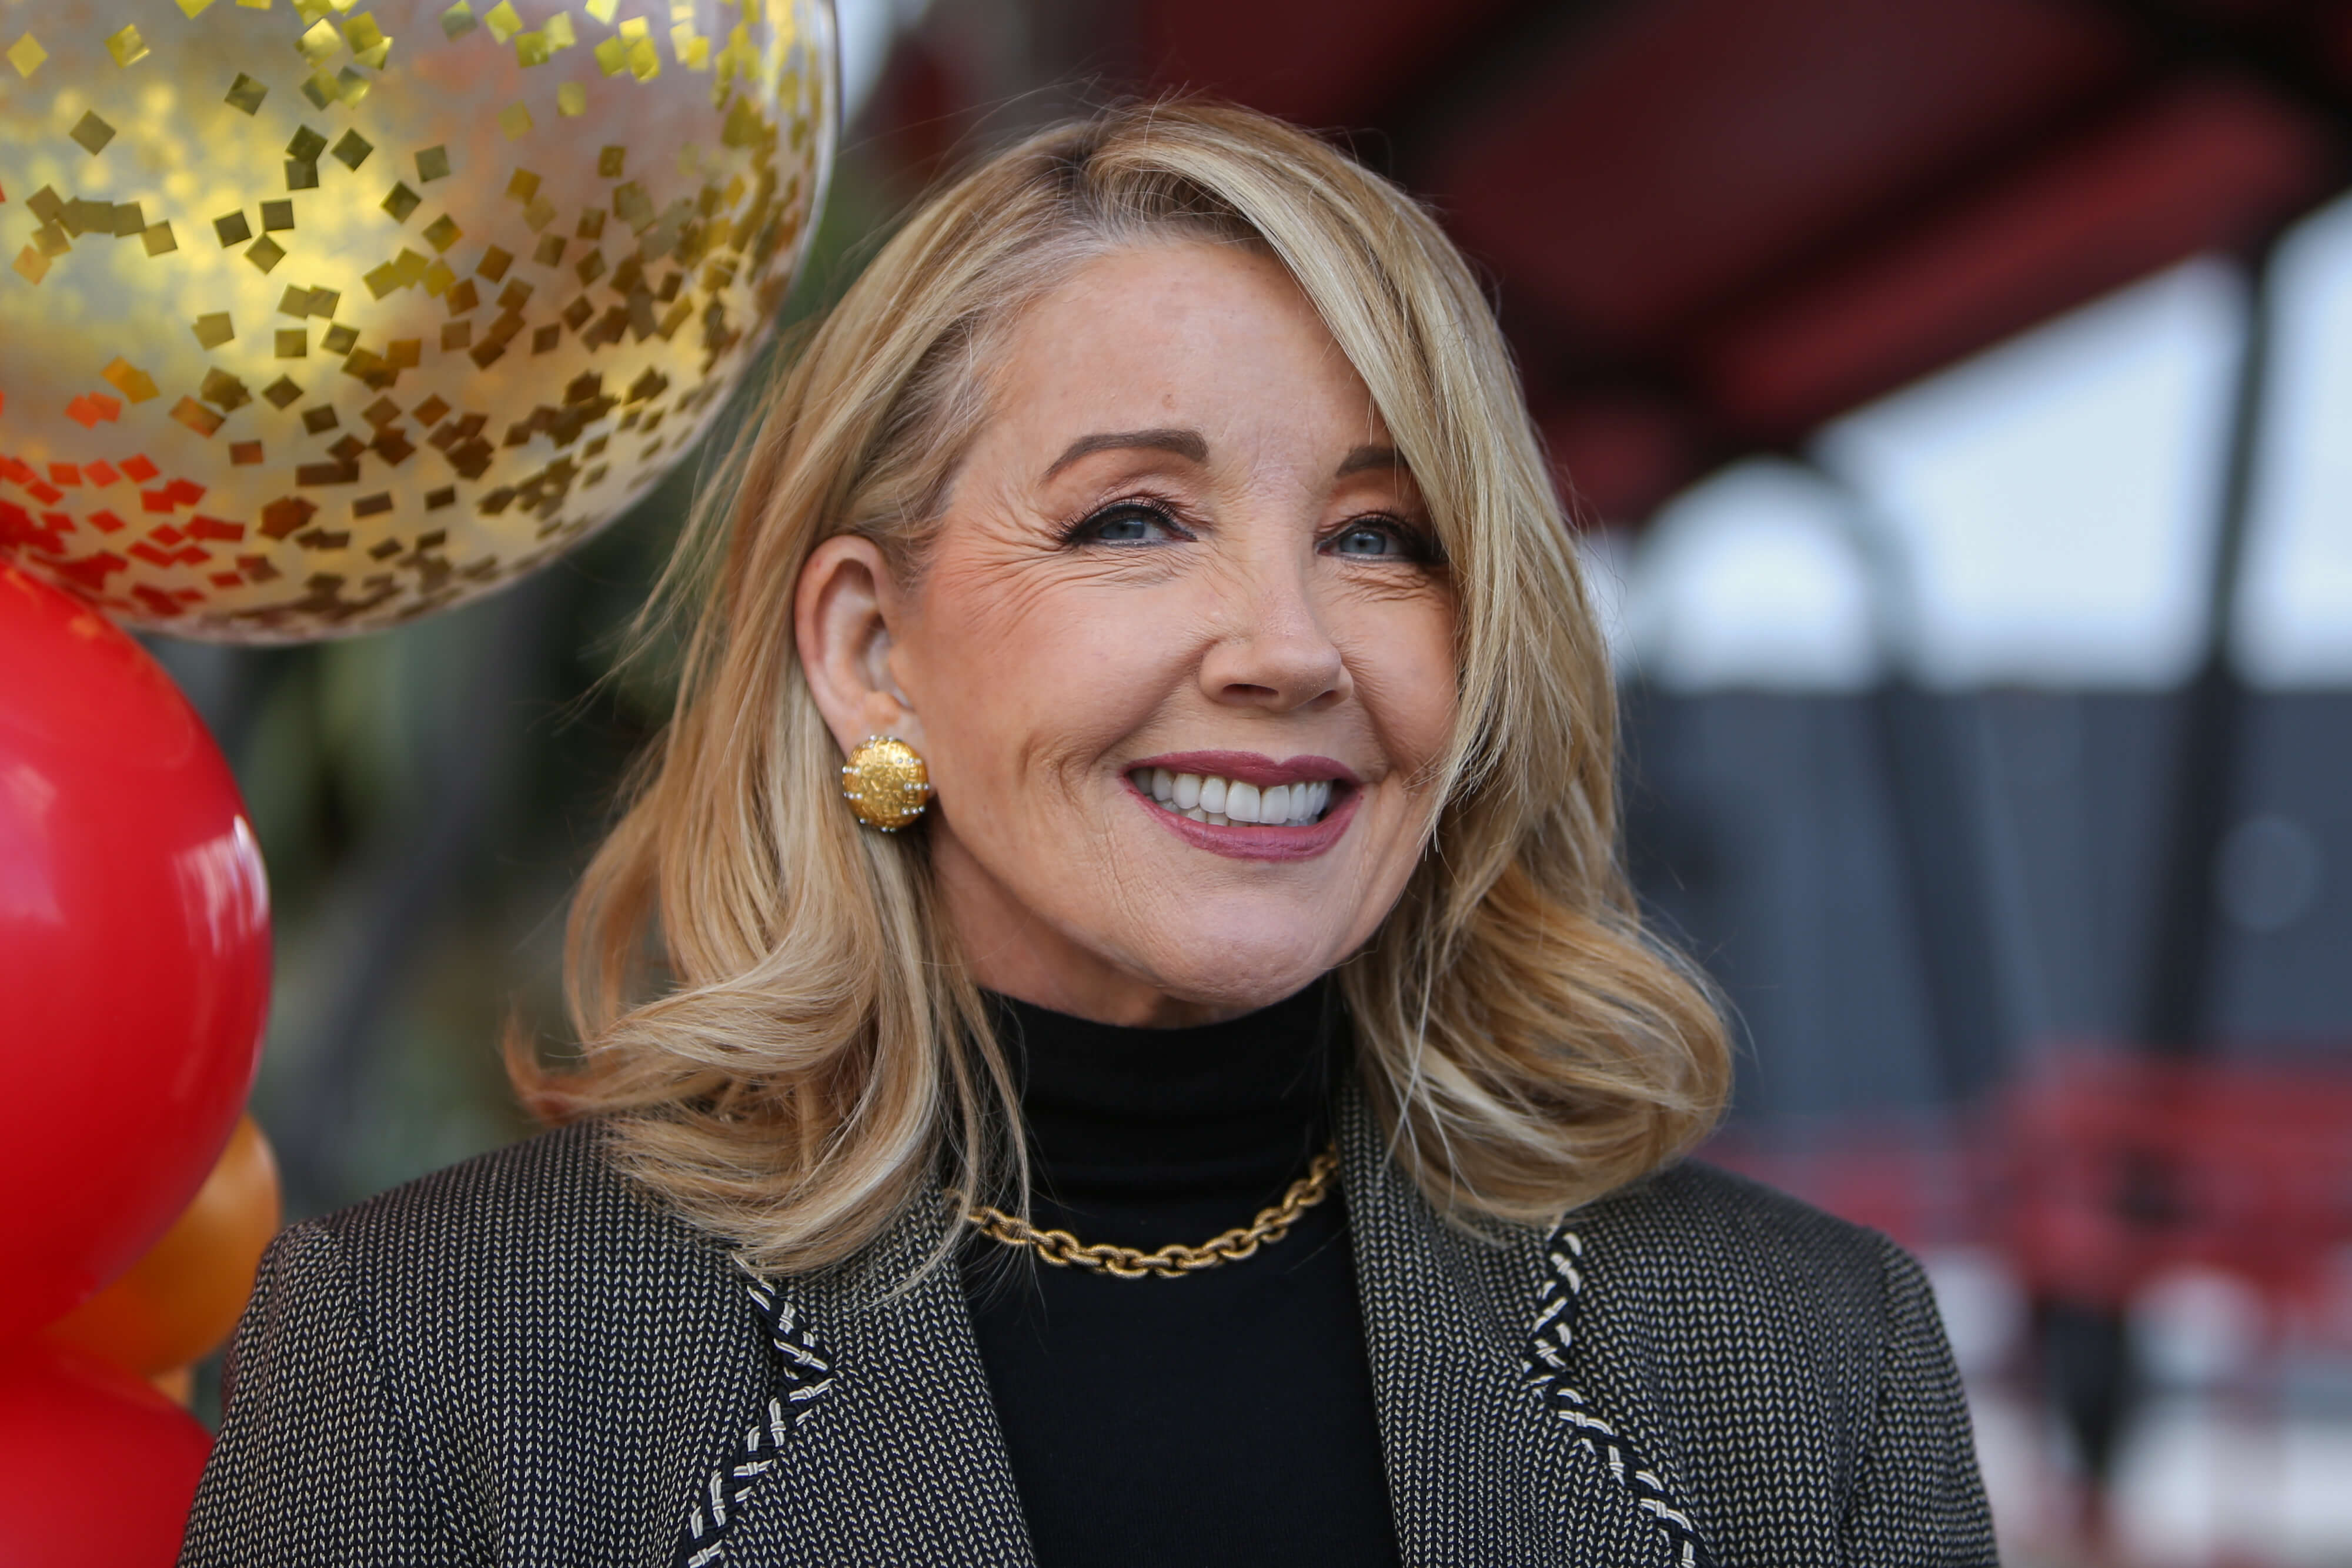 'The Young and the Restless' star Melody Thomas Scott dressed in a black shirt and grey blazer; smiles during a time capsule opening for the soap opera.